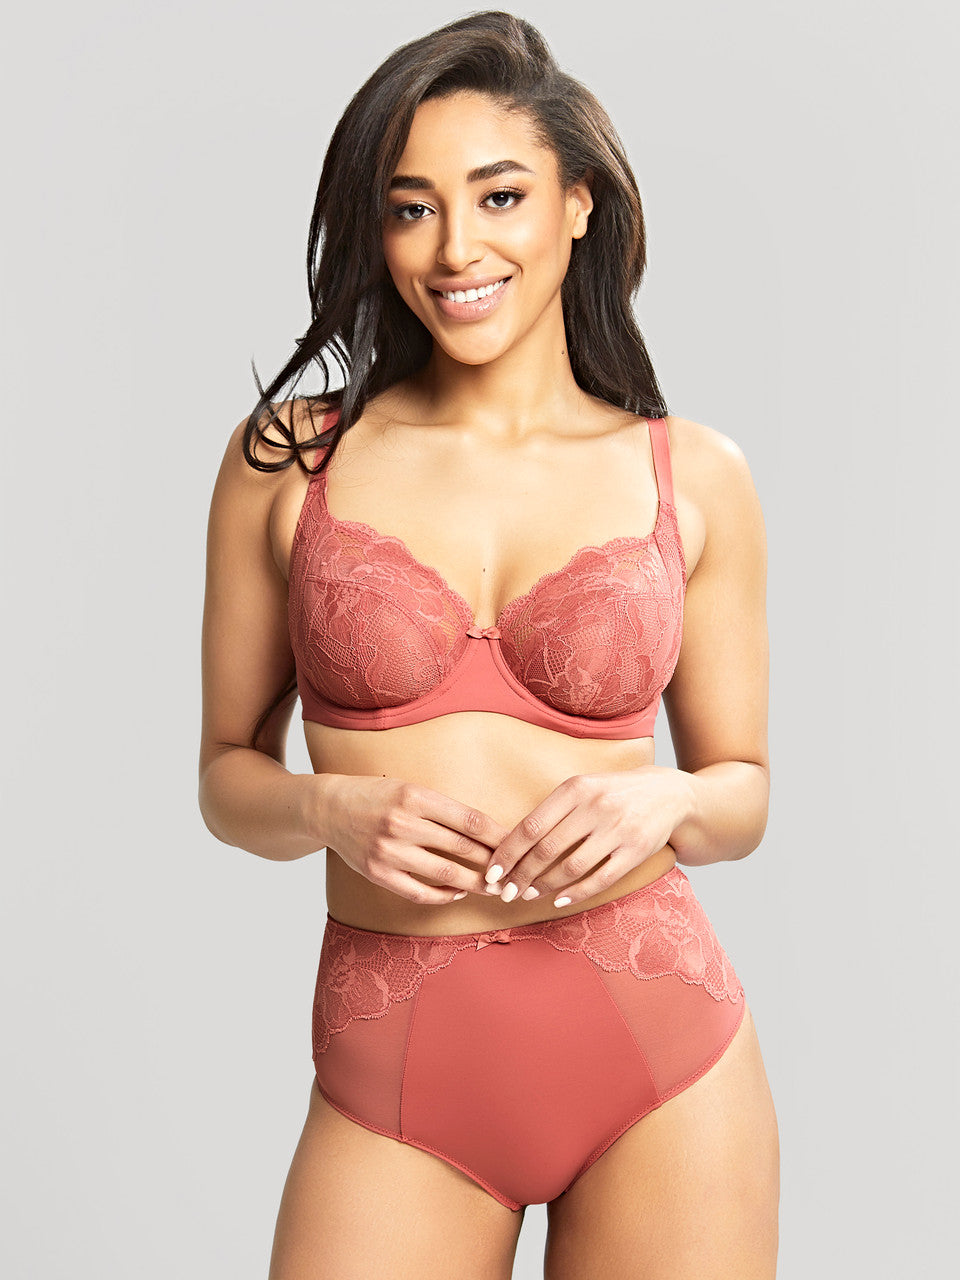 Rocha Low Front Balconnet Bra and Deep Brief in Garnet Rose worn by model front view